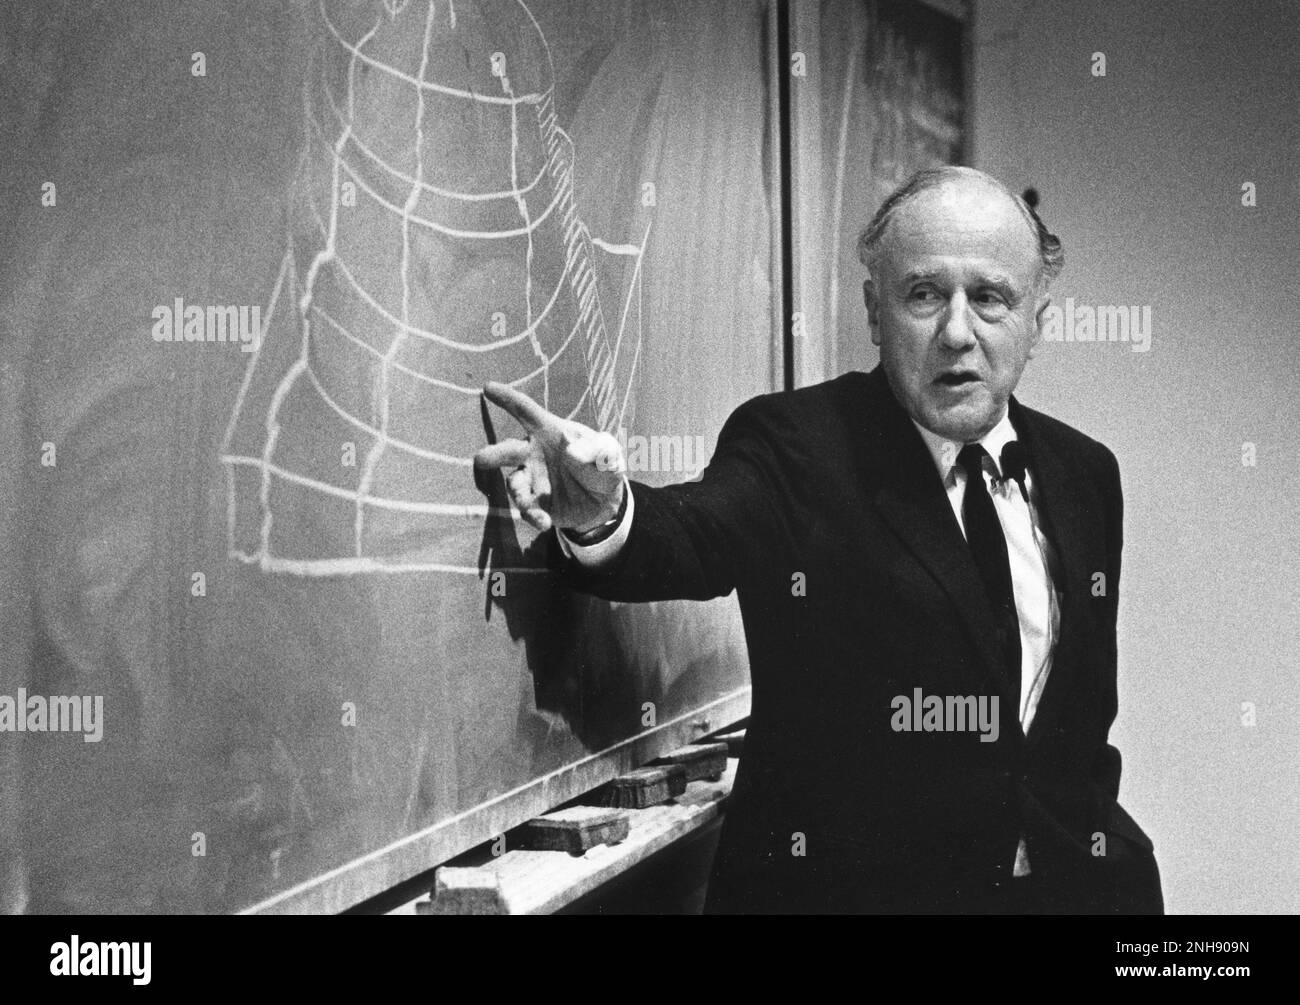 John Wheeler (1911-2008), American theoretical physicist, lecturing on 'Beyond the End of Time' at the University of Missouri at Rolla, November 16, 1981. Stock Photo